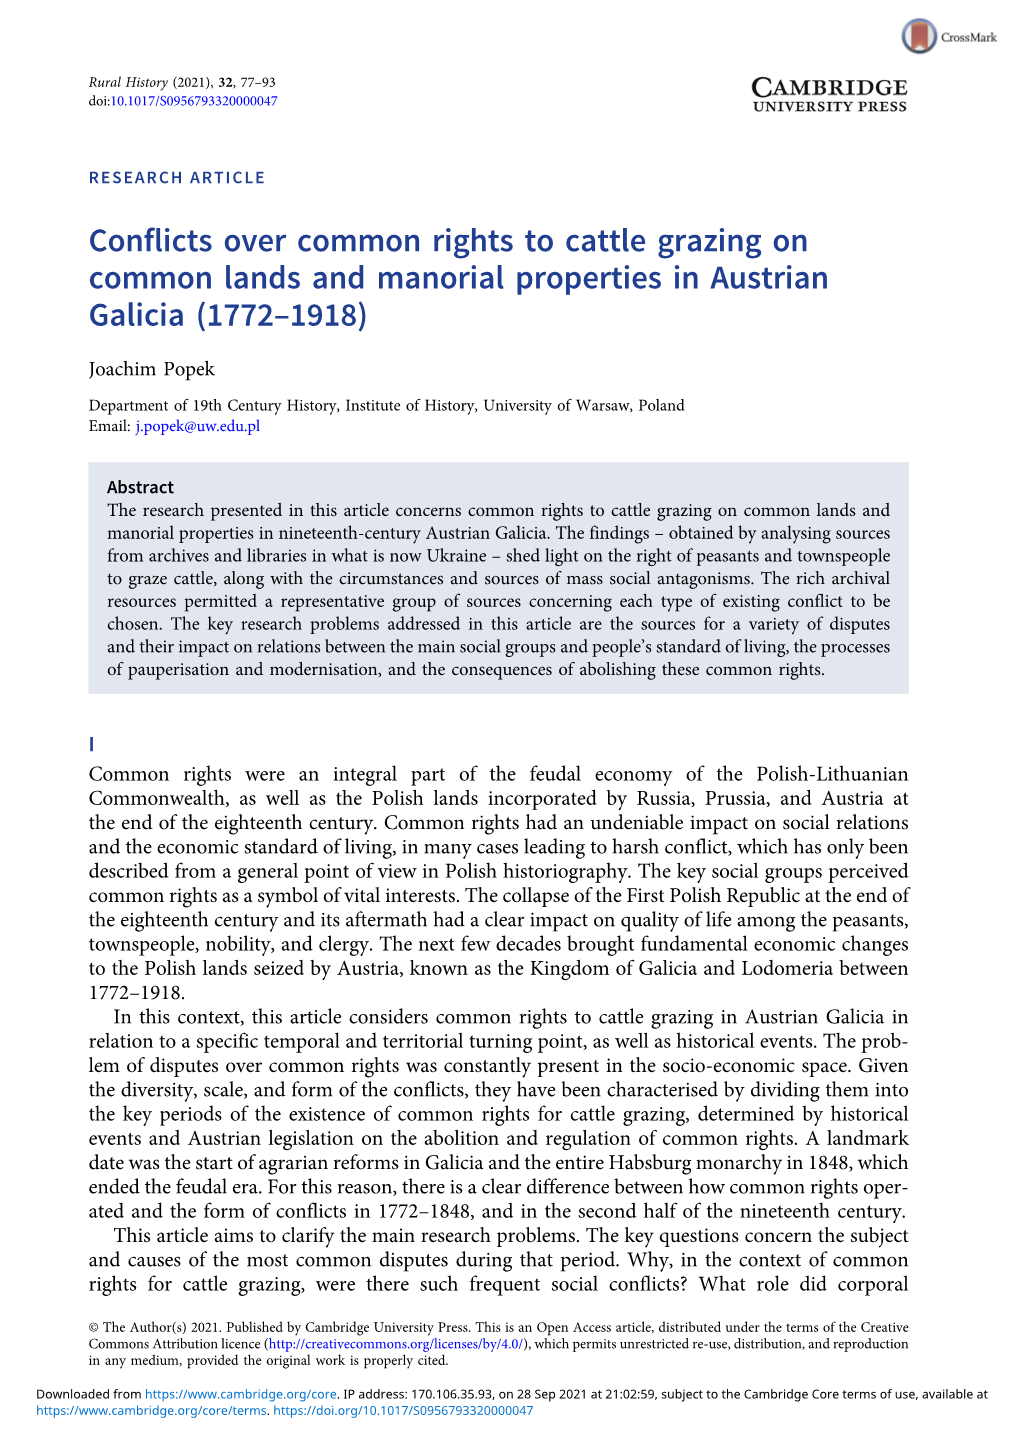 Conflicts Over Common Rights to Cattle Grazing on Common Lands and Manorial Properties in Austrian Galicia (1772-1918)